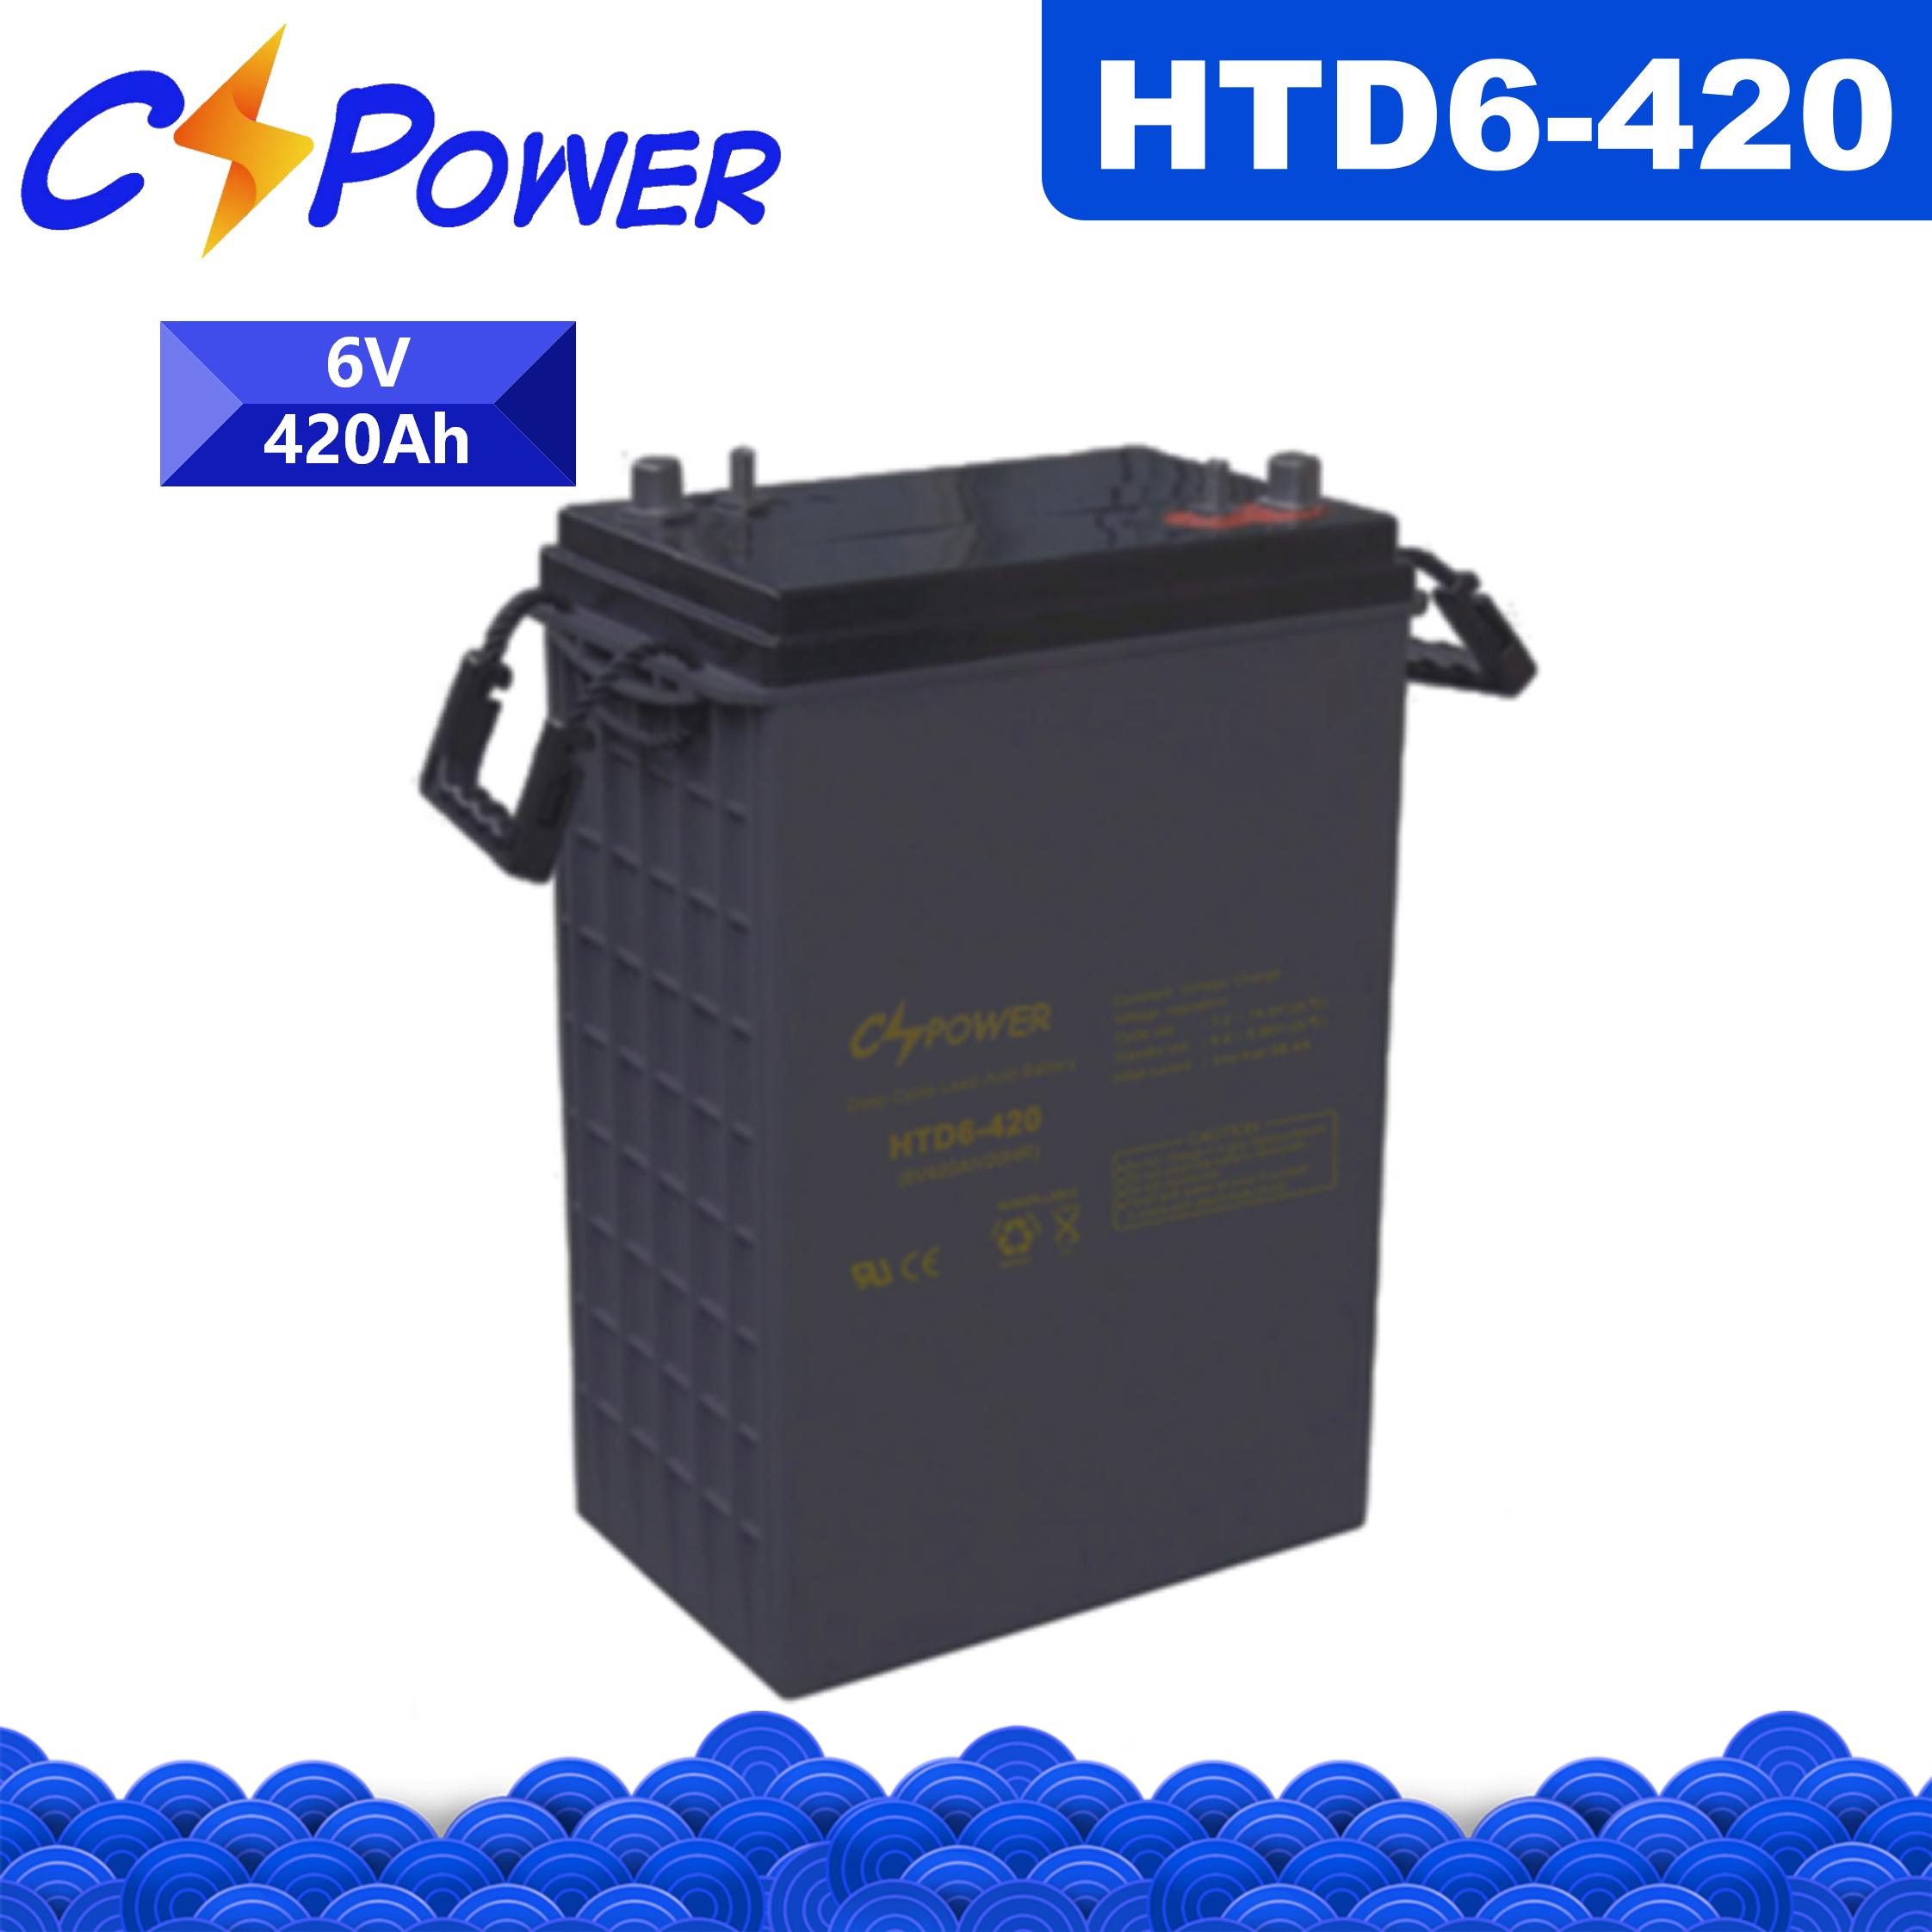 CSPower HTD6-420 Deep Cycle VRLA AGM Battery